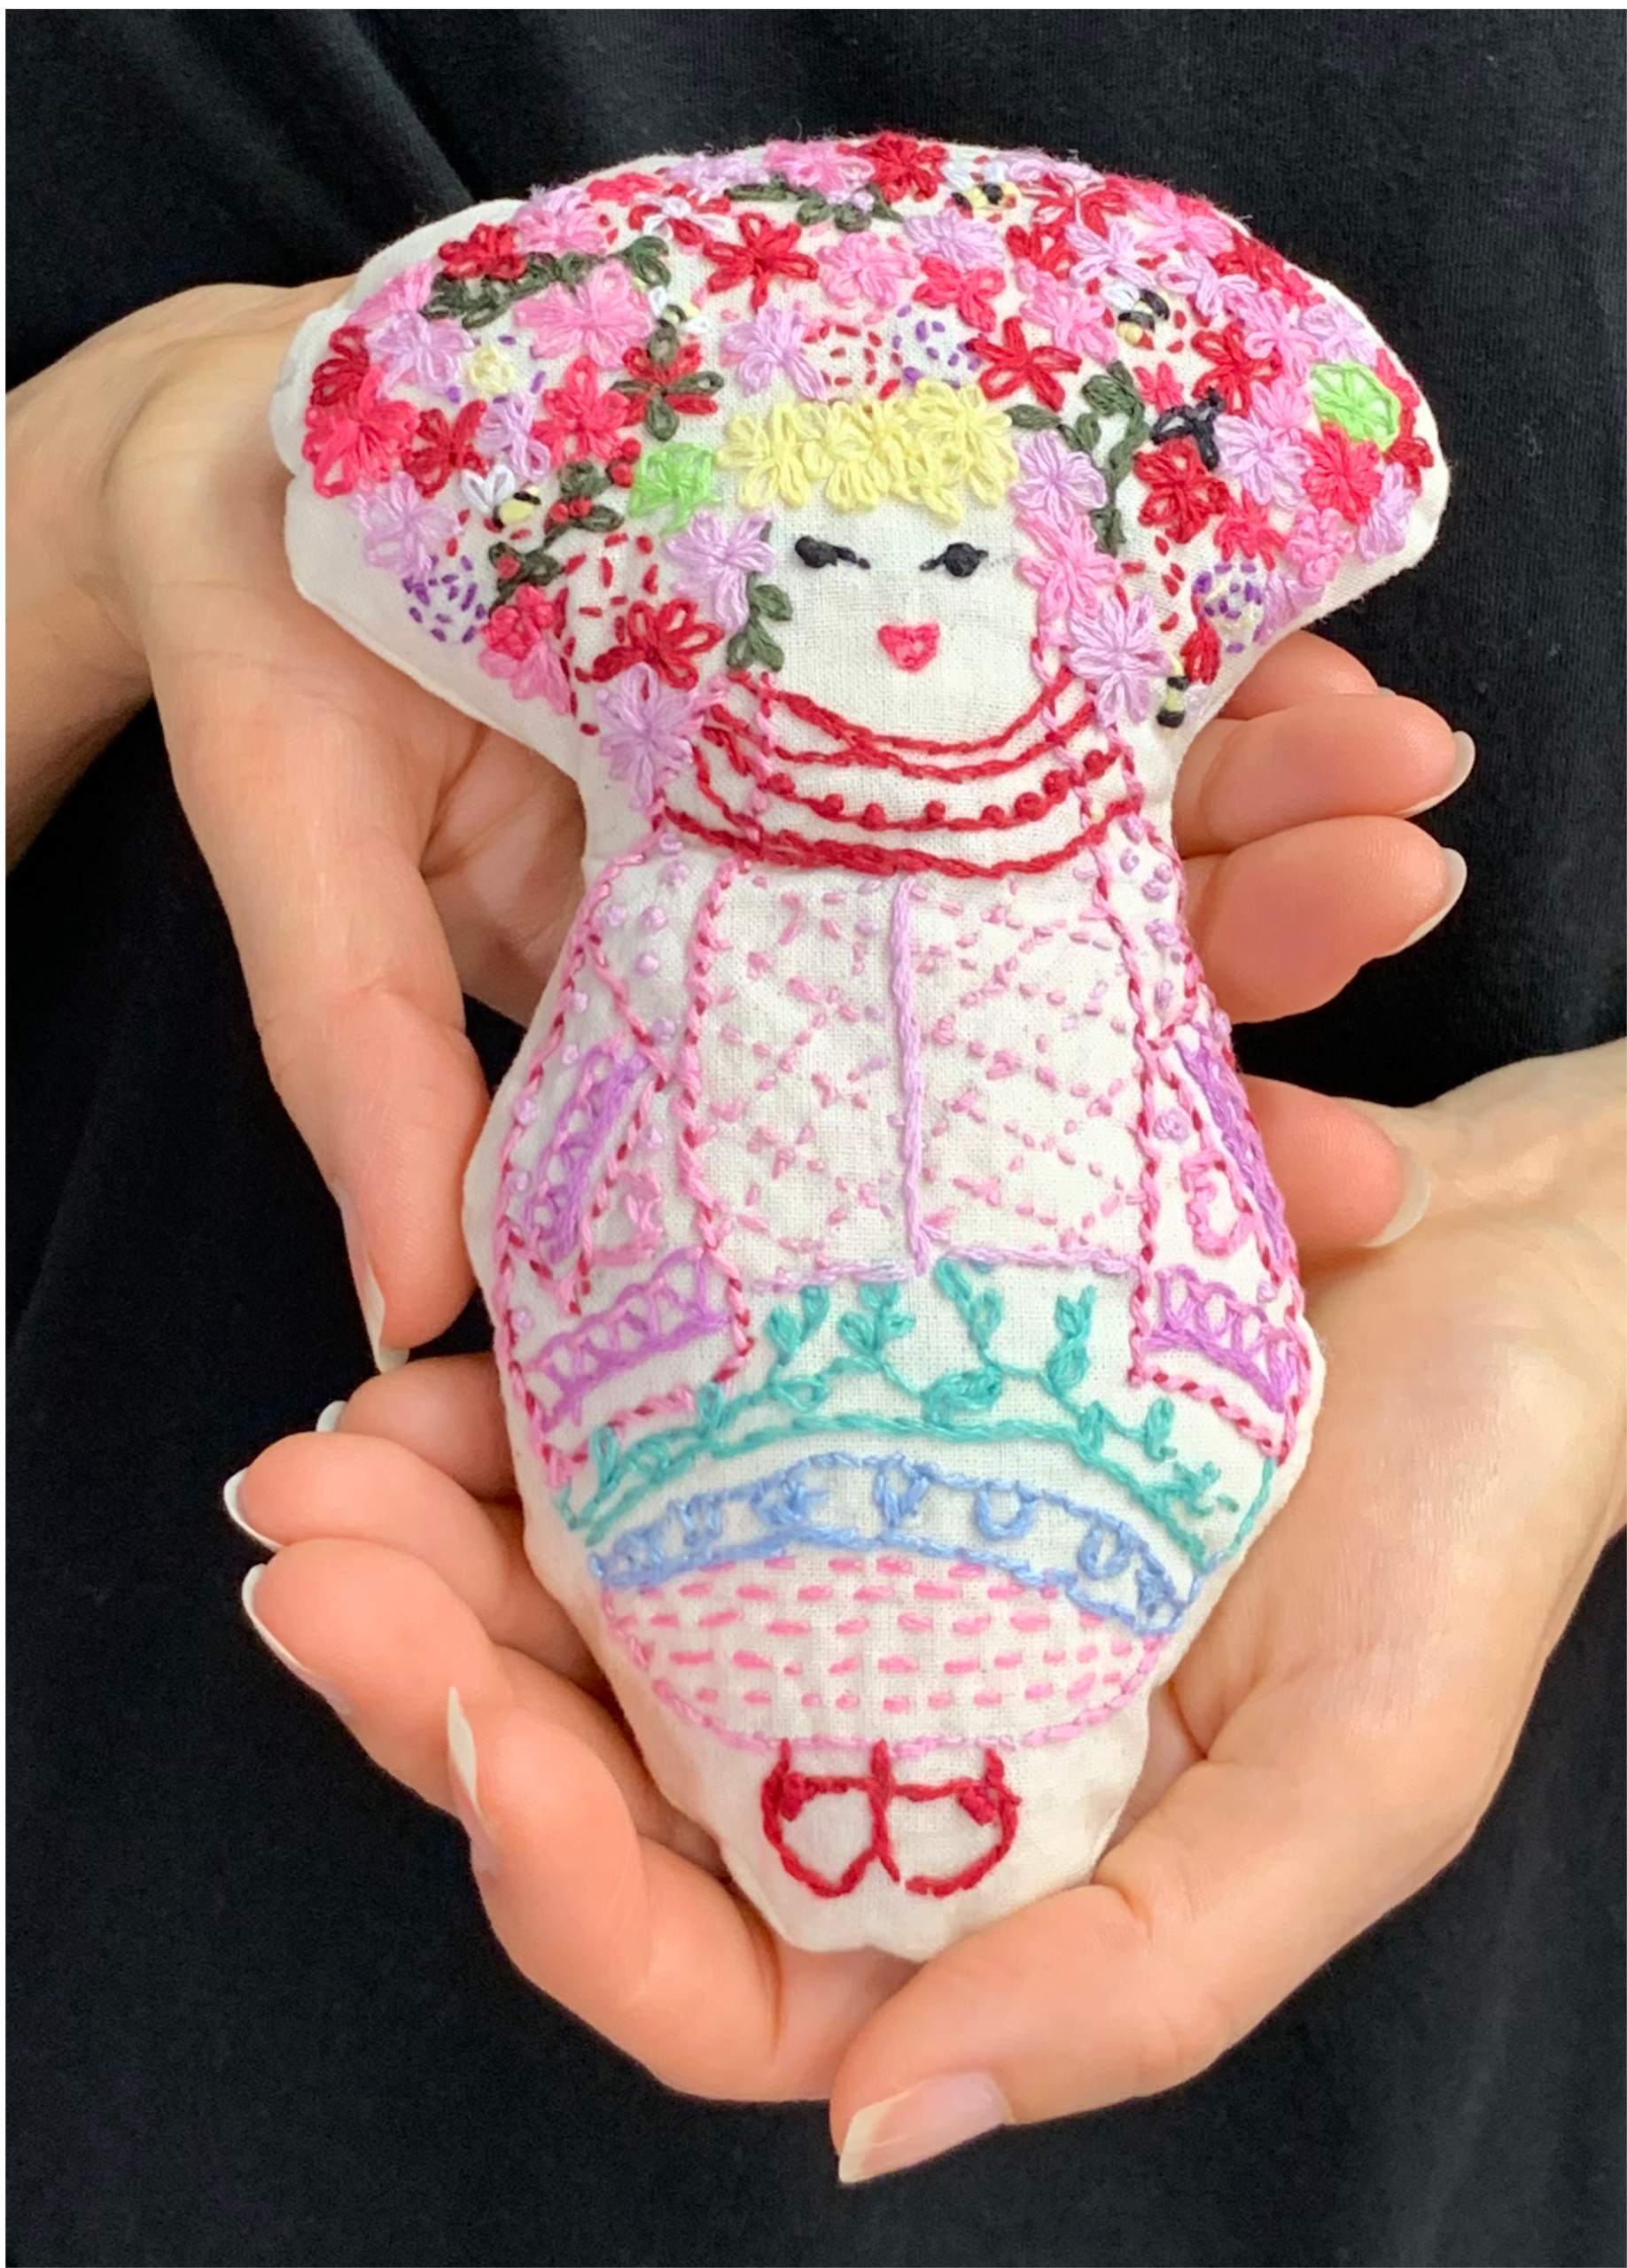 Jen holds a small, hand embroidered doll, that wears a massive flowered headdress